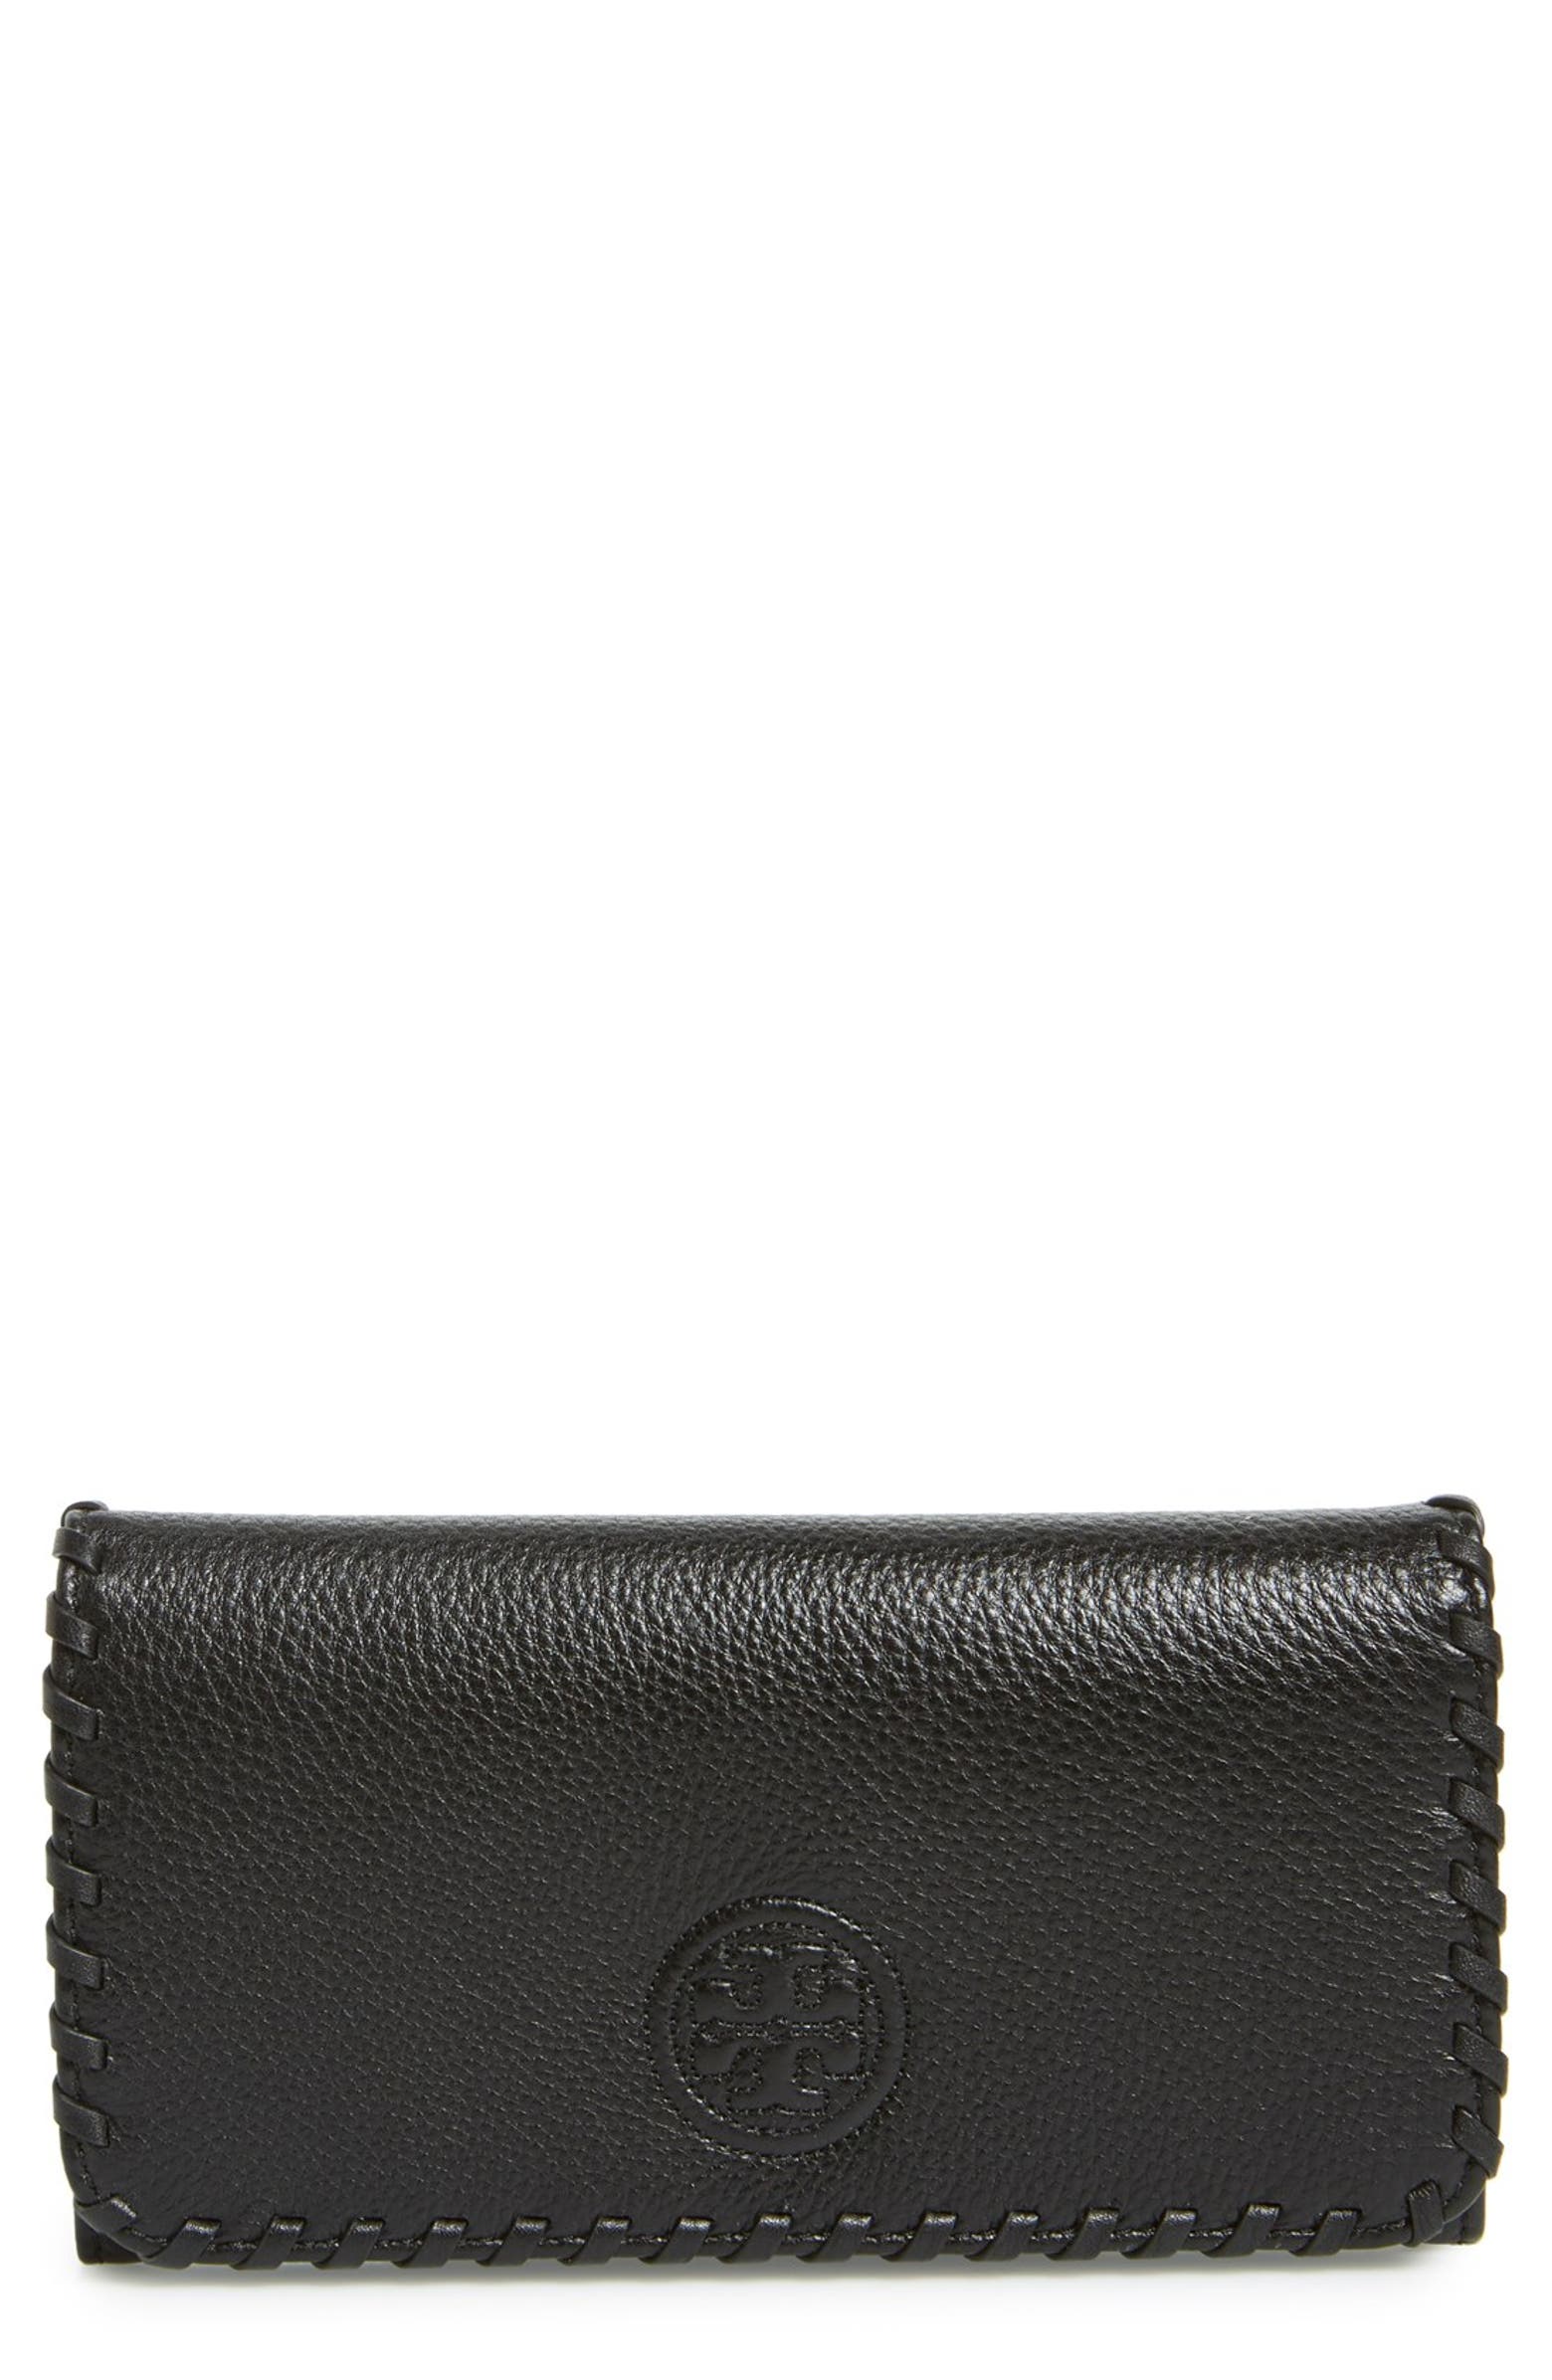 Tory Burch 'Marion' Envelope Continental Wallet | Nordstrom